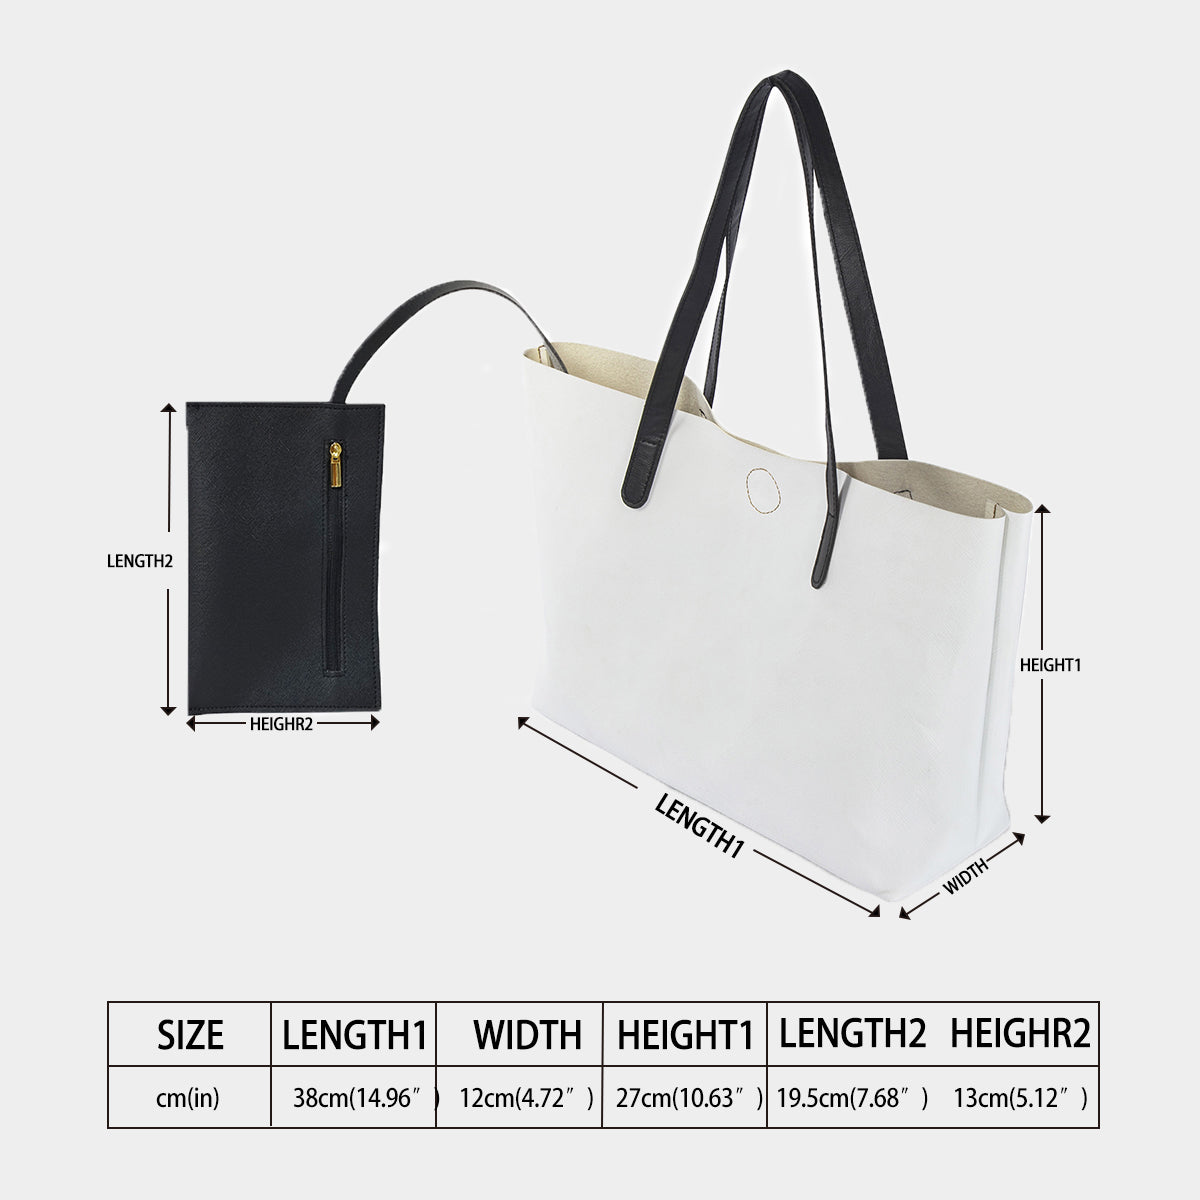 The hunt Shopping Tote Bag With Black Mini Purse